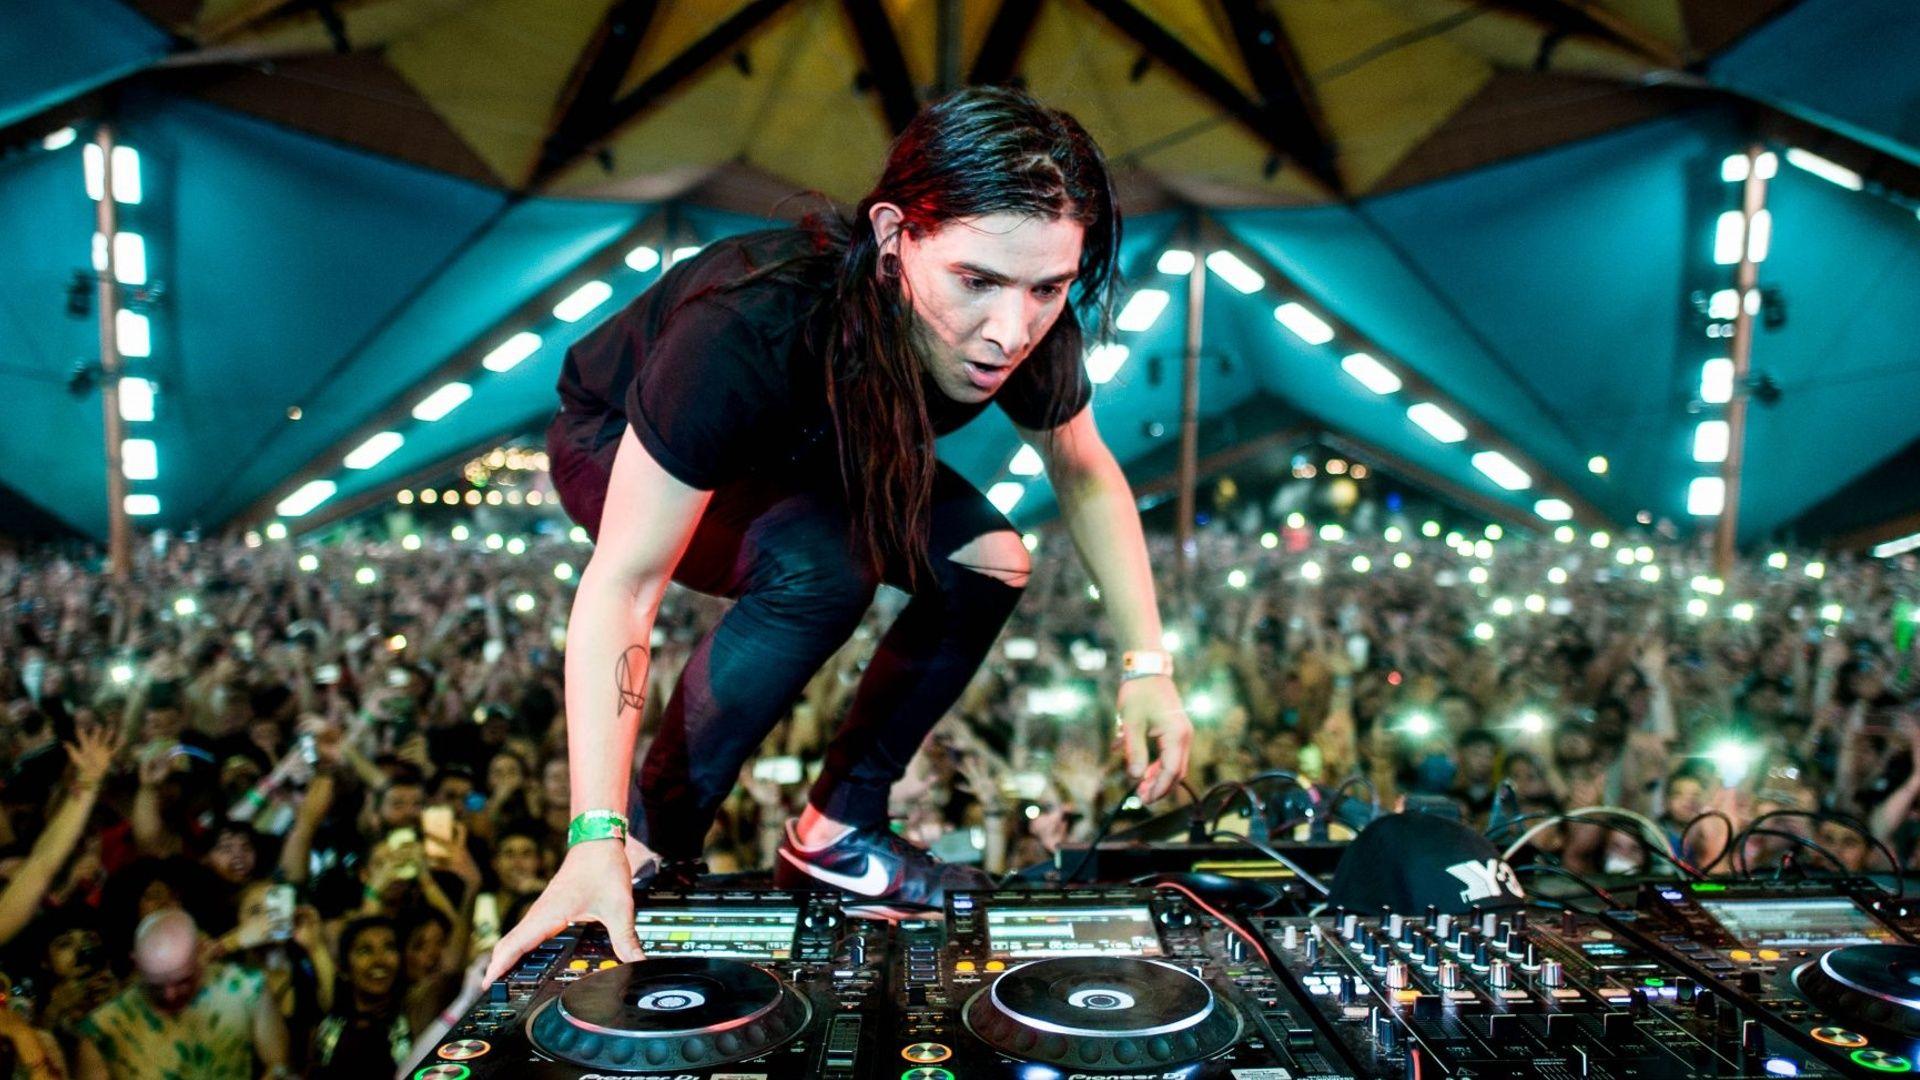 Celebrate Skrillex's birthday with his epic Essential Mix from 2011